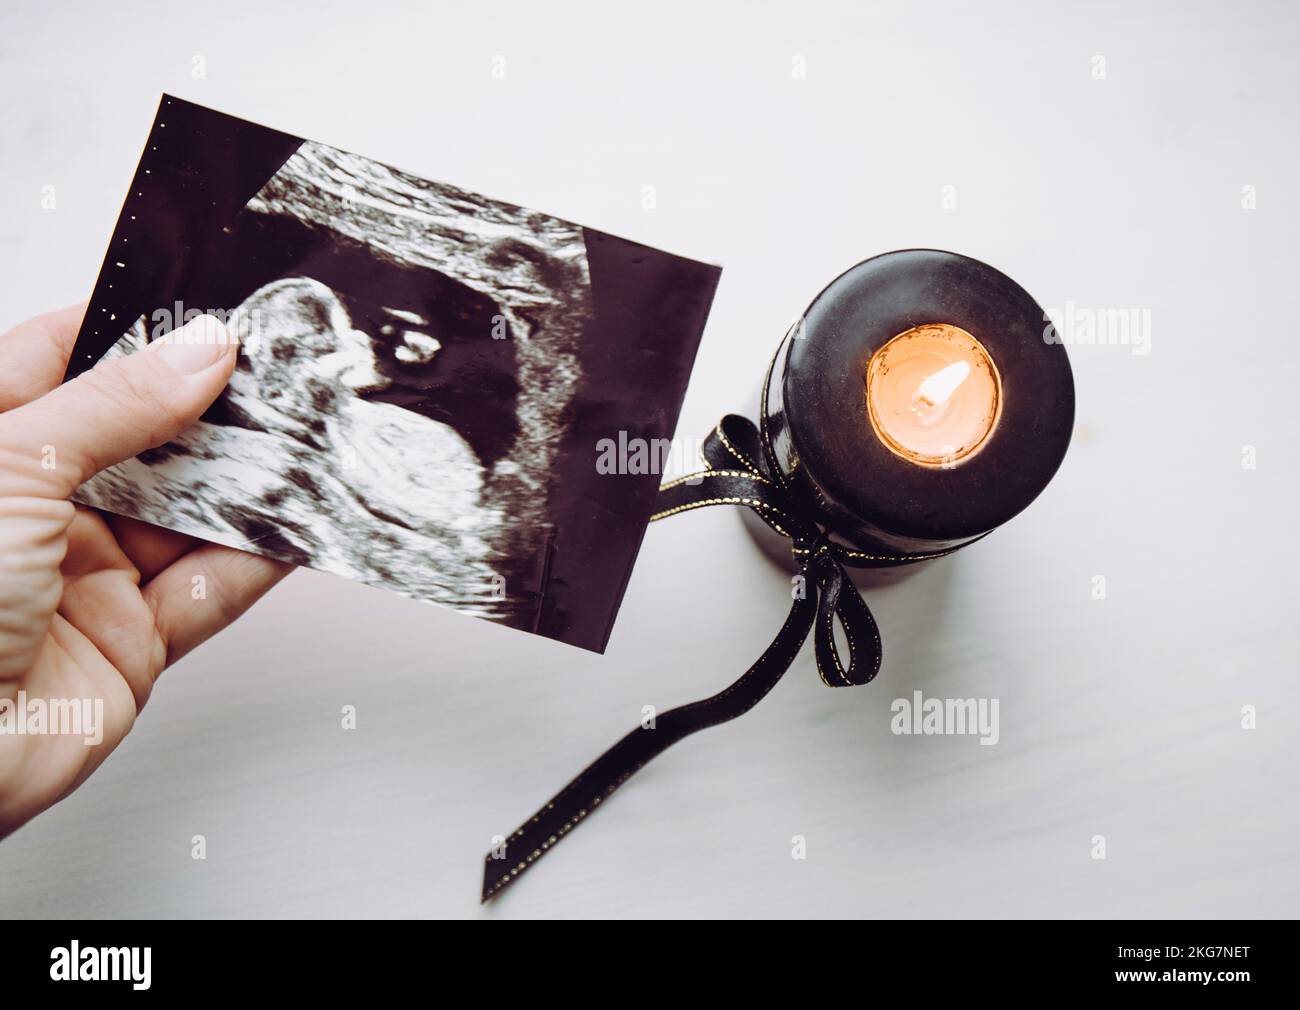 Conceptual image of woman mourning, miscarriage. Mother hand holding ultrasound picture of baby. Black candle with black ribbon burning. Stock Photo